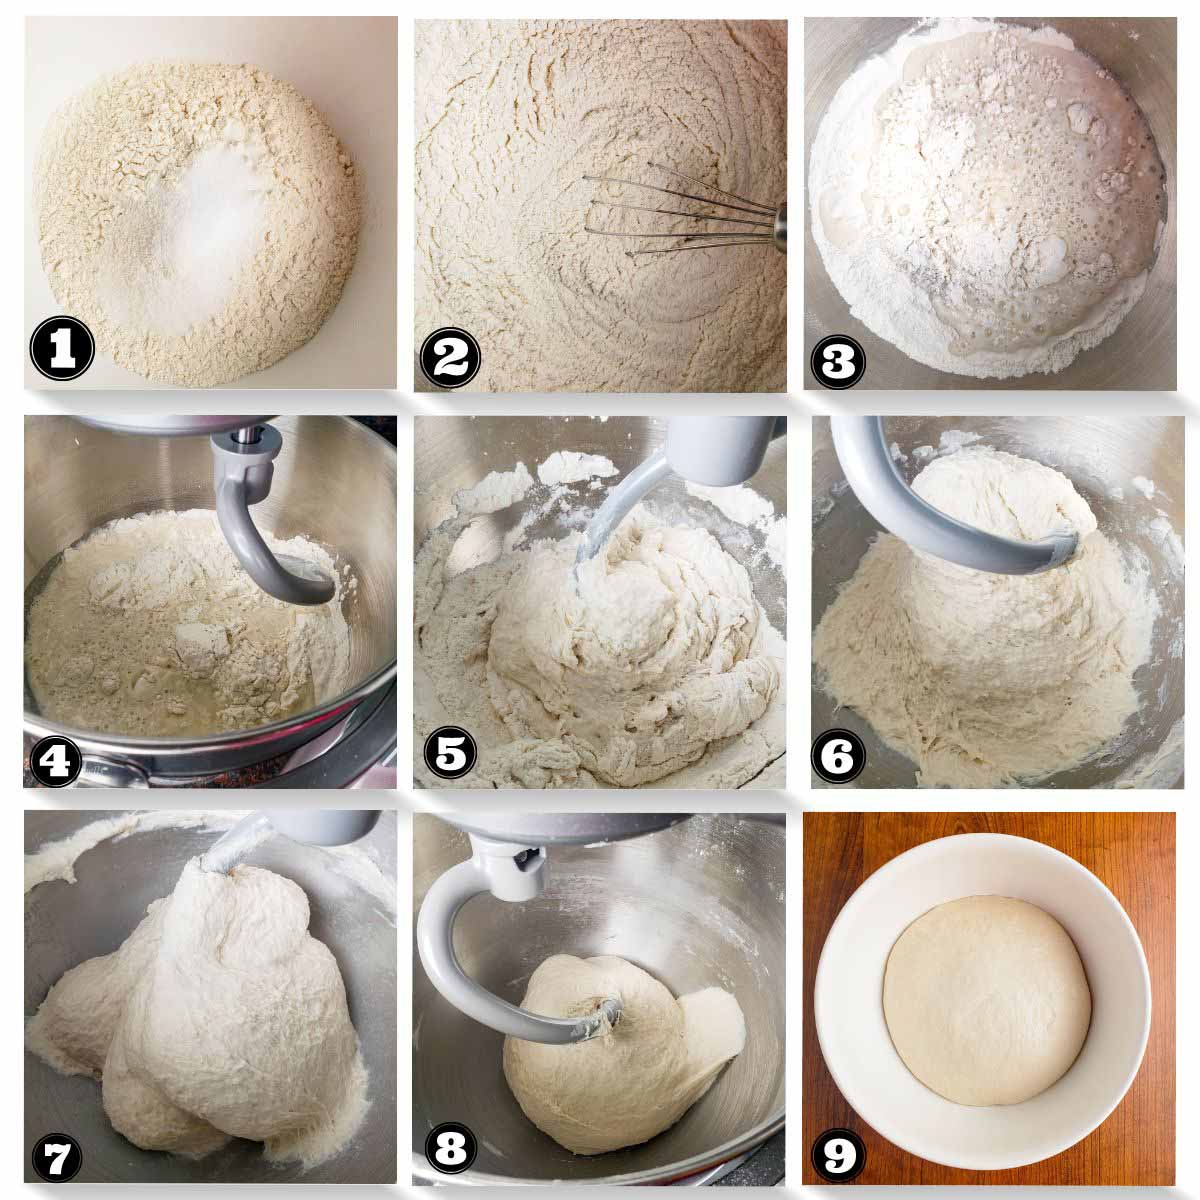 step by step images showing kneading the dough in the stand mixer